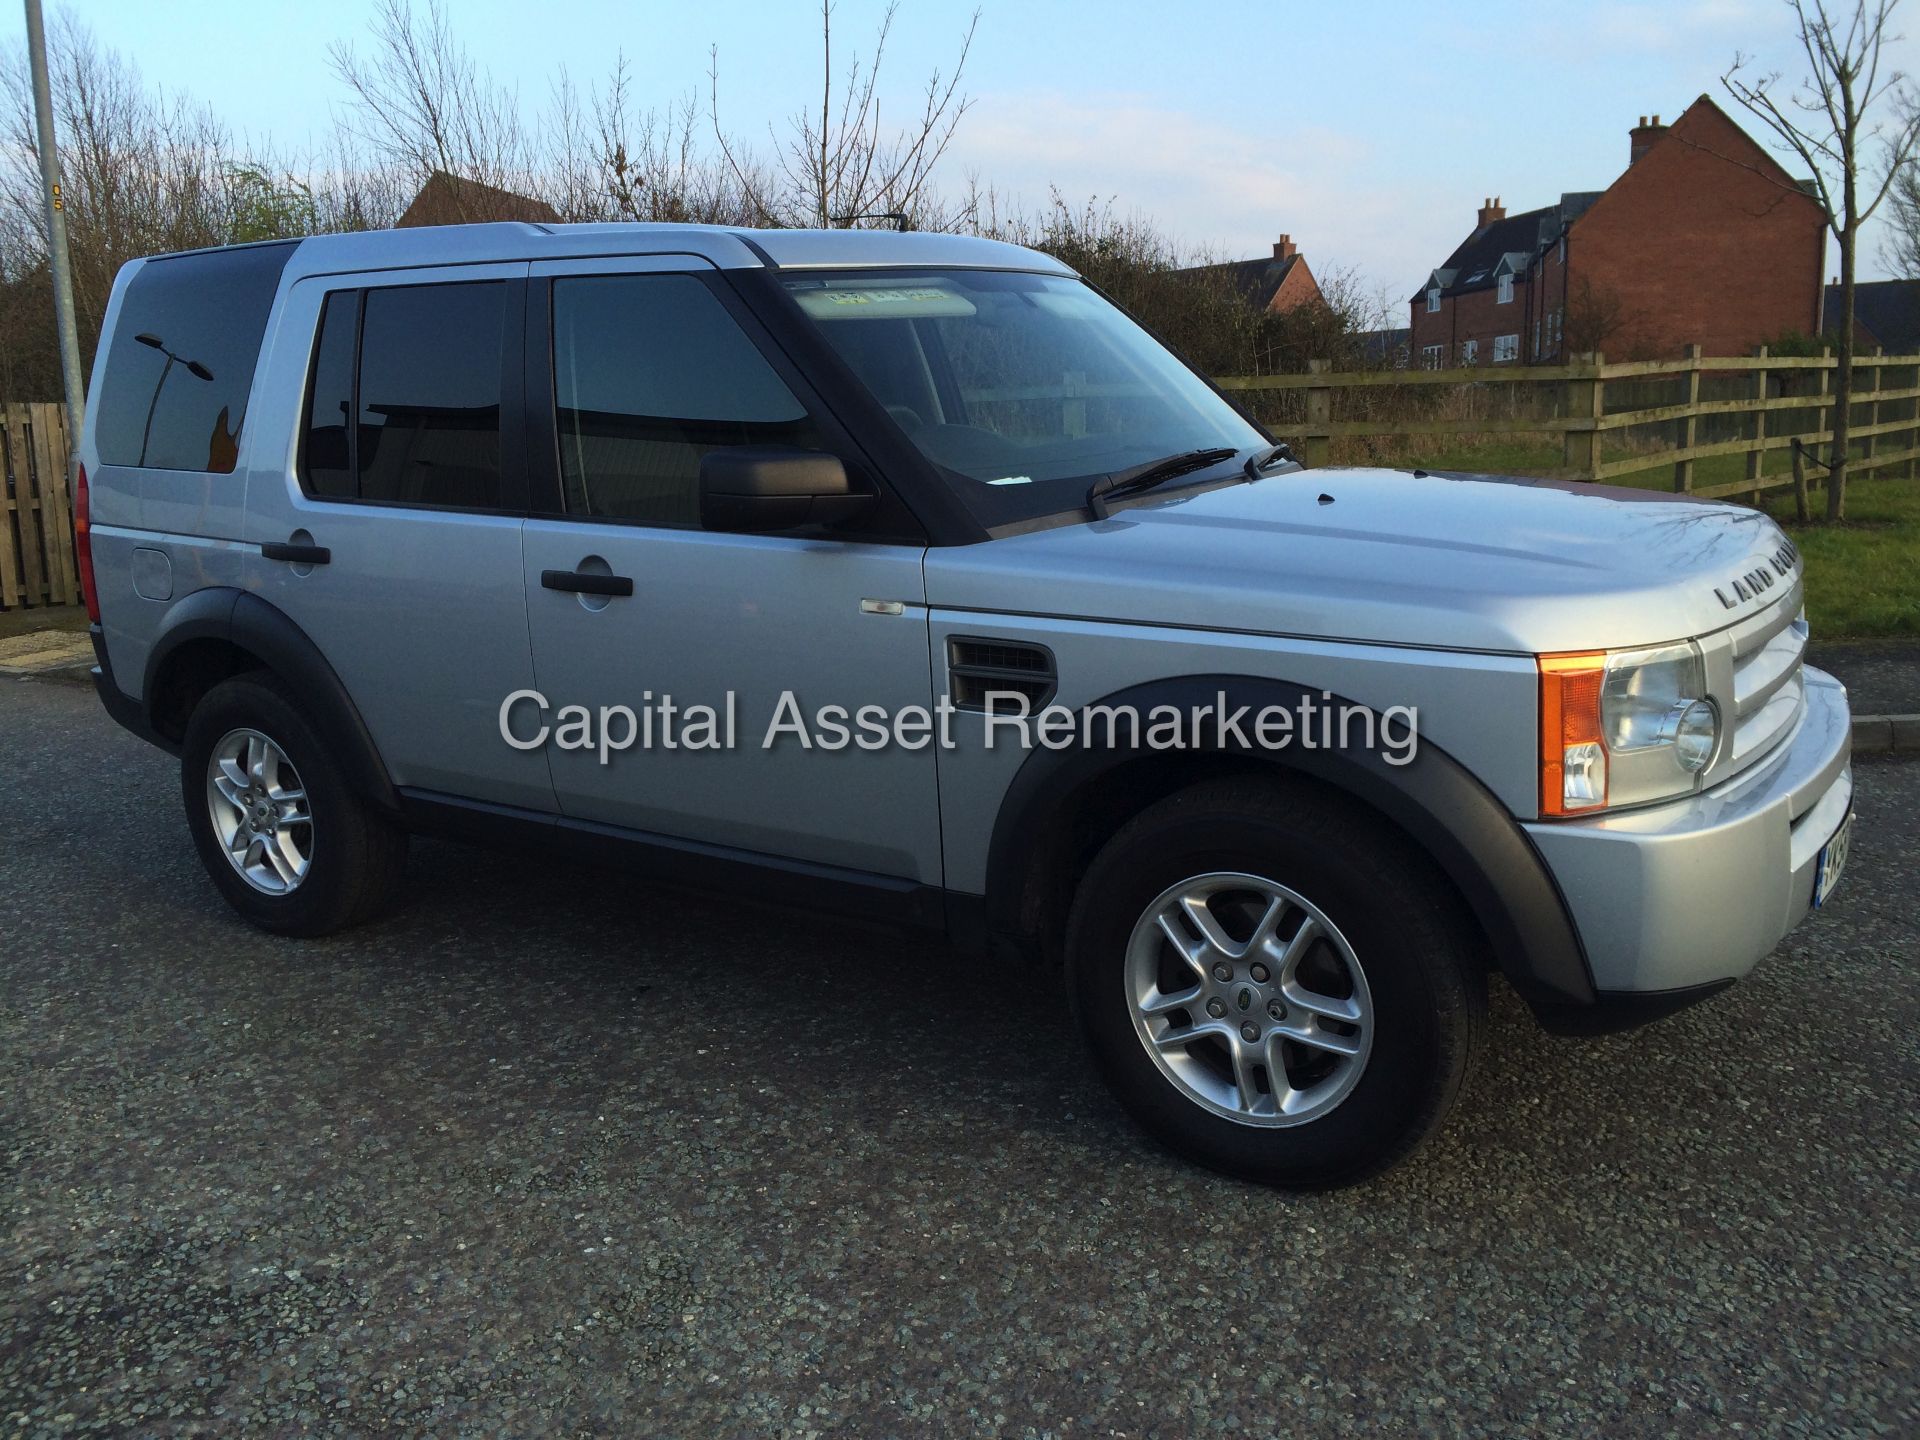 LANDROVER DISCOVERY 3 "TDV6" AUTOMATIC - 1 PREVIOUS OWNER FROM NEW - AIR SUSPENSION - PRIVACY GLASS! - Image 7 of 18